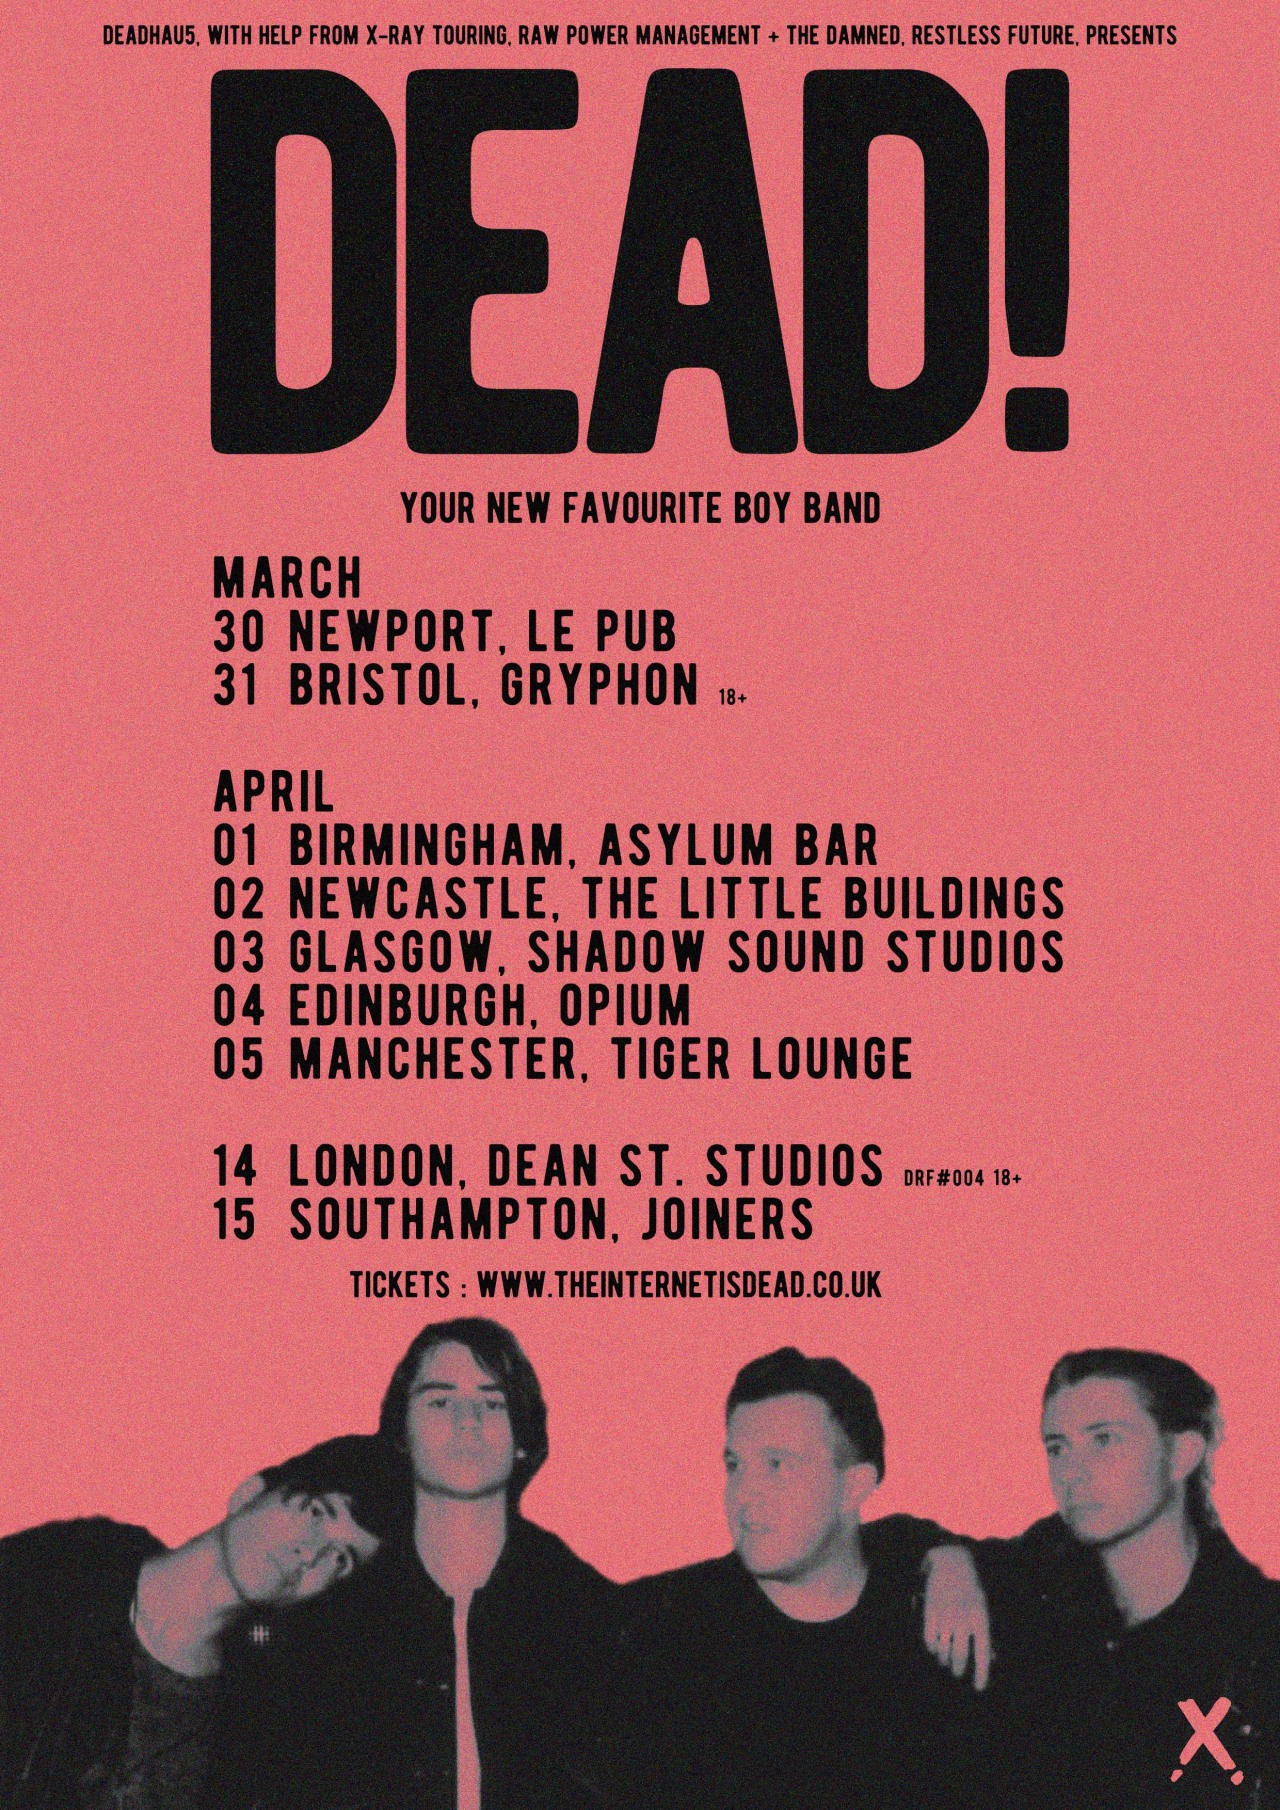 DEAD! - YOUR NEW FAVOURITE BOY BAND.
No one famous would take us on tour so here&rsquo;s a bunch of shows that we booked ourselves.
We&rsquo;ve picked some of our favourite clubs, some tiny venues and just straight up rehearsal rooms where we couldn&rsquo;t get any venues.
Tickets on sale 9am Tues 23rd. 
X